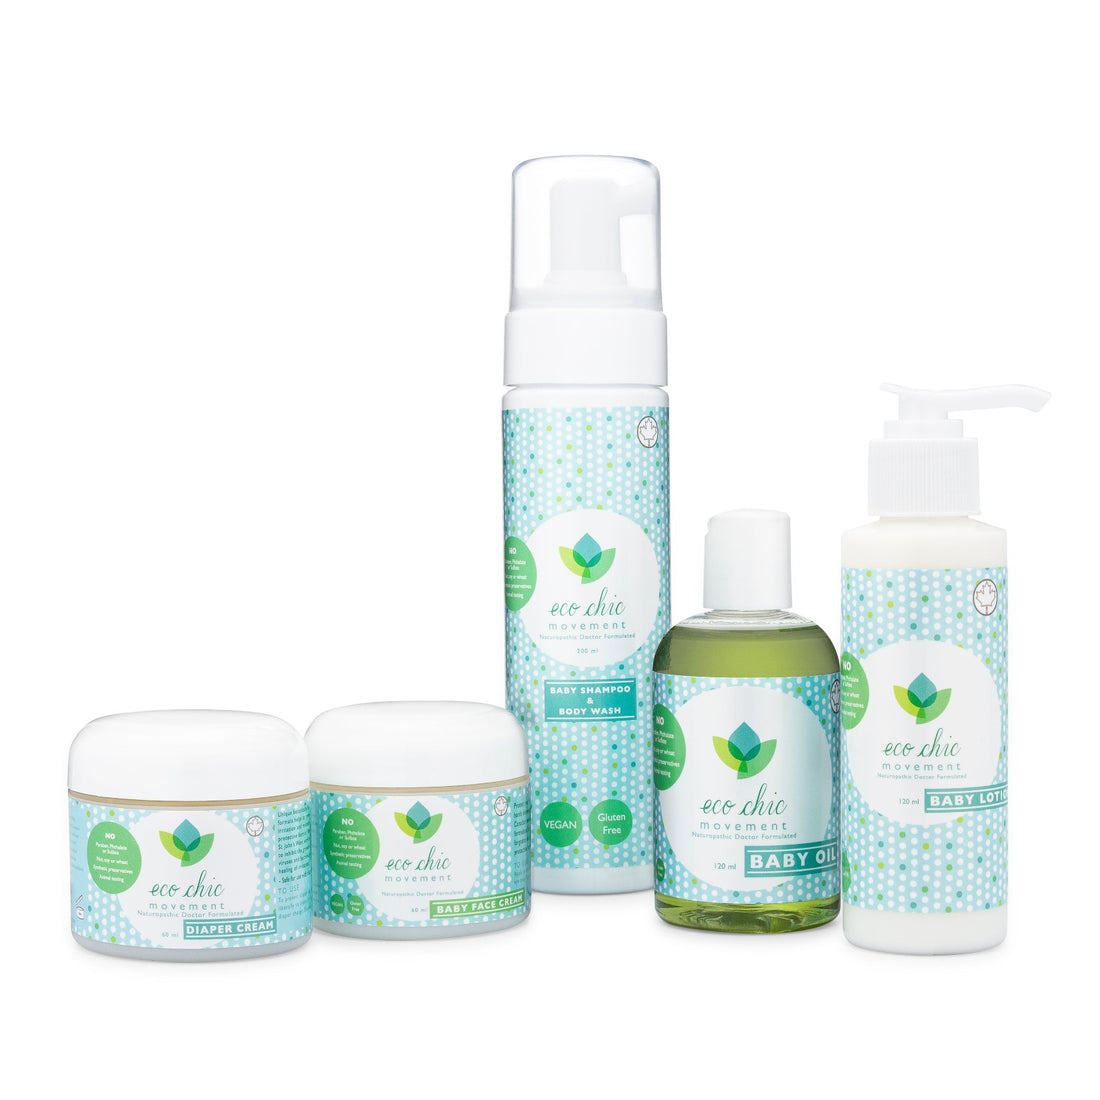 Baby Shower Gift Set featuring the best non toxic baby products from Eco Chic Movement